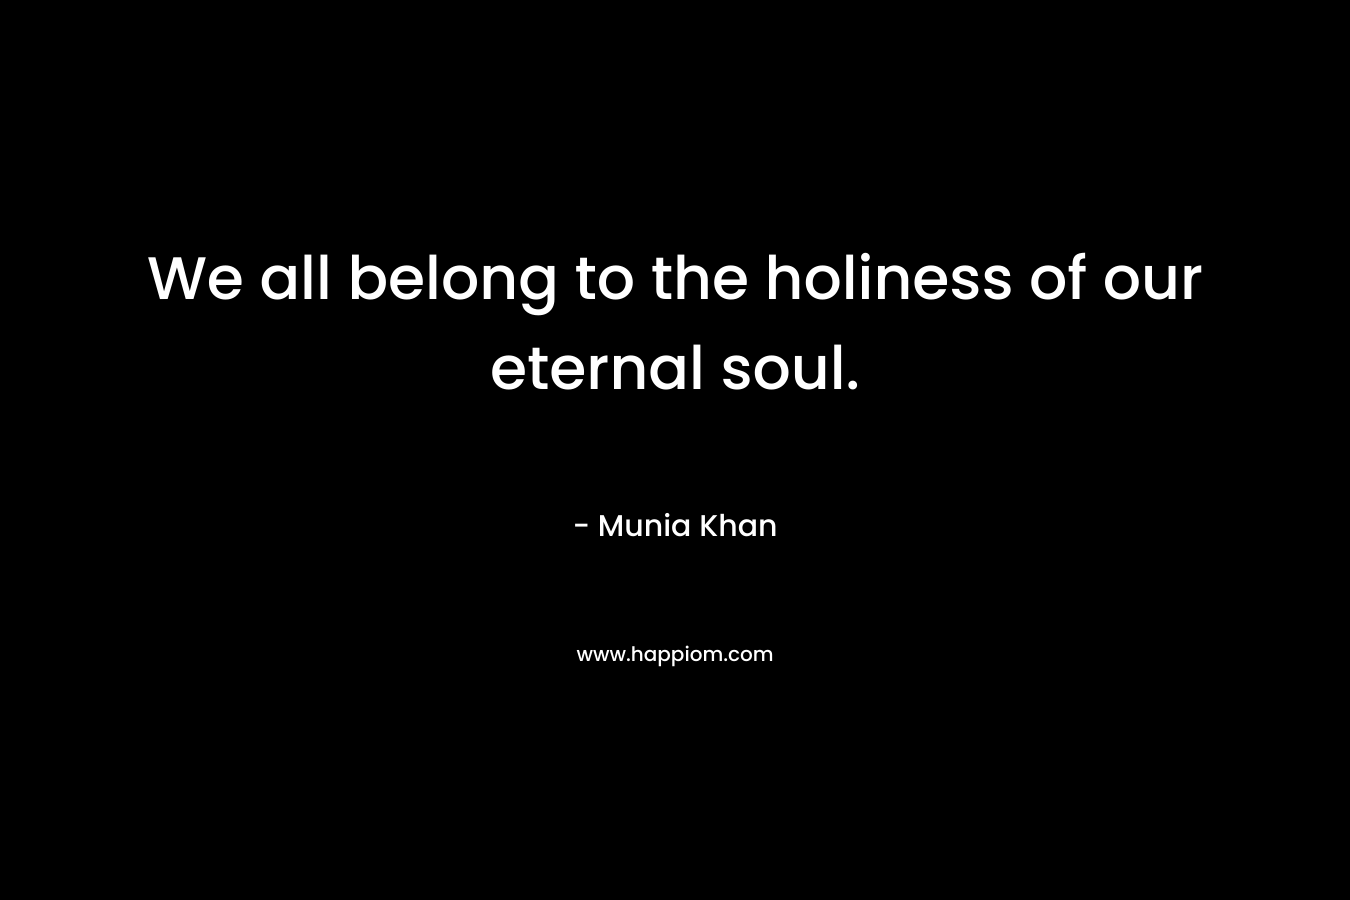 We all belong to the holiness of our eternal soul.